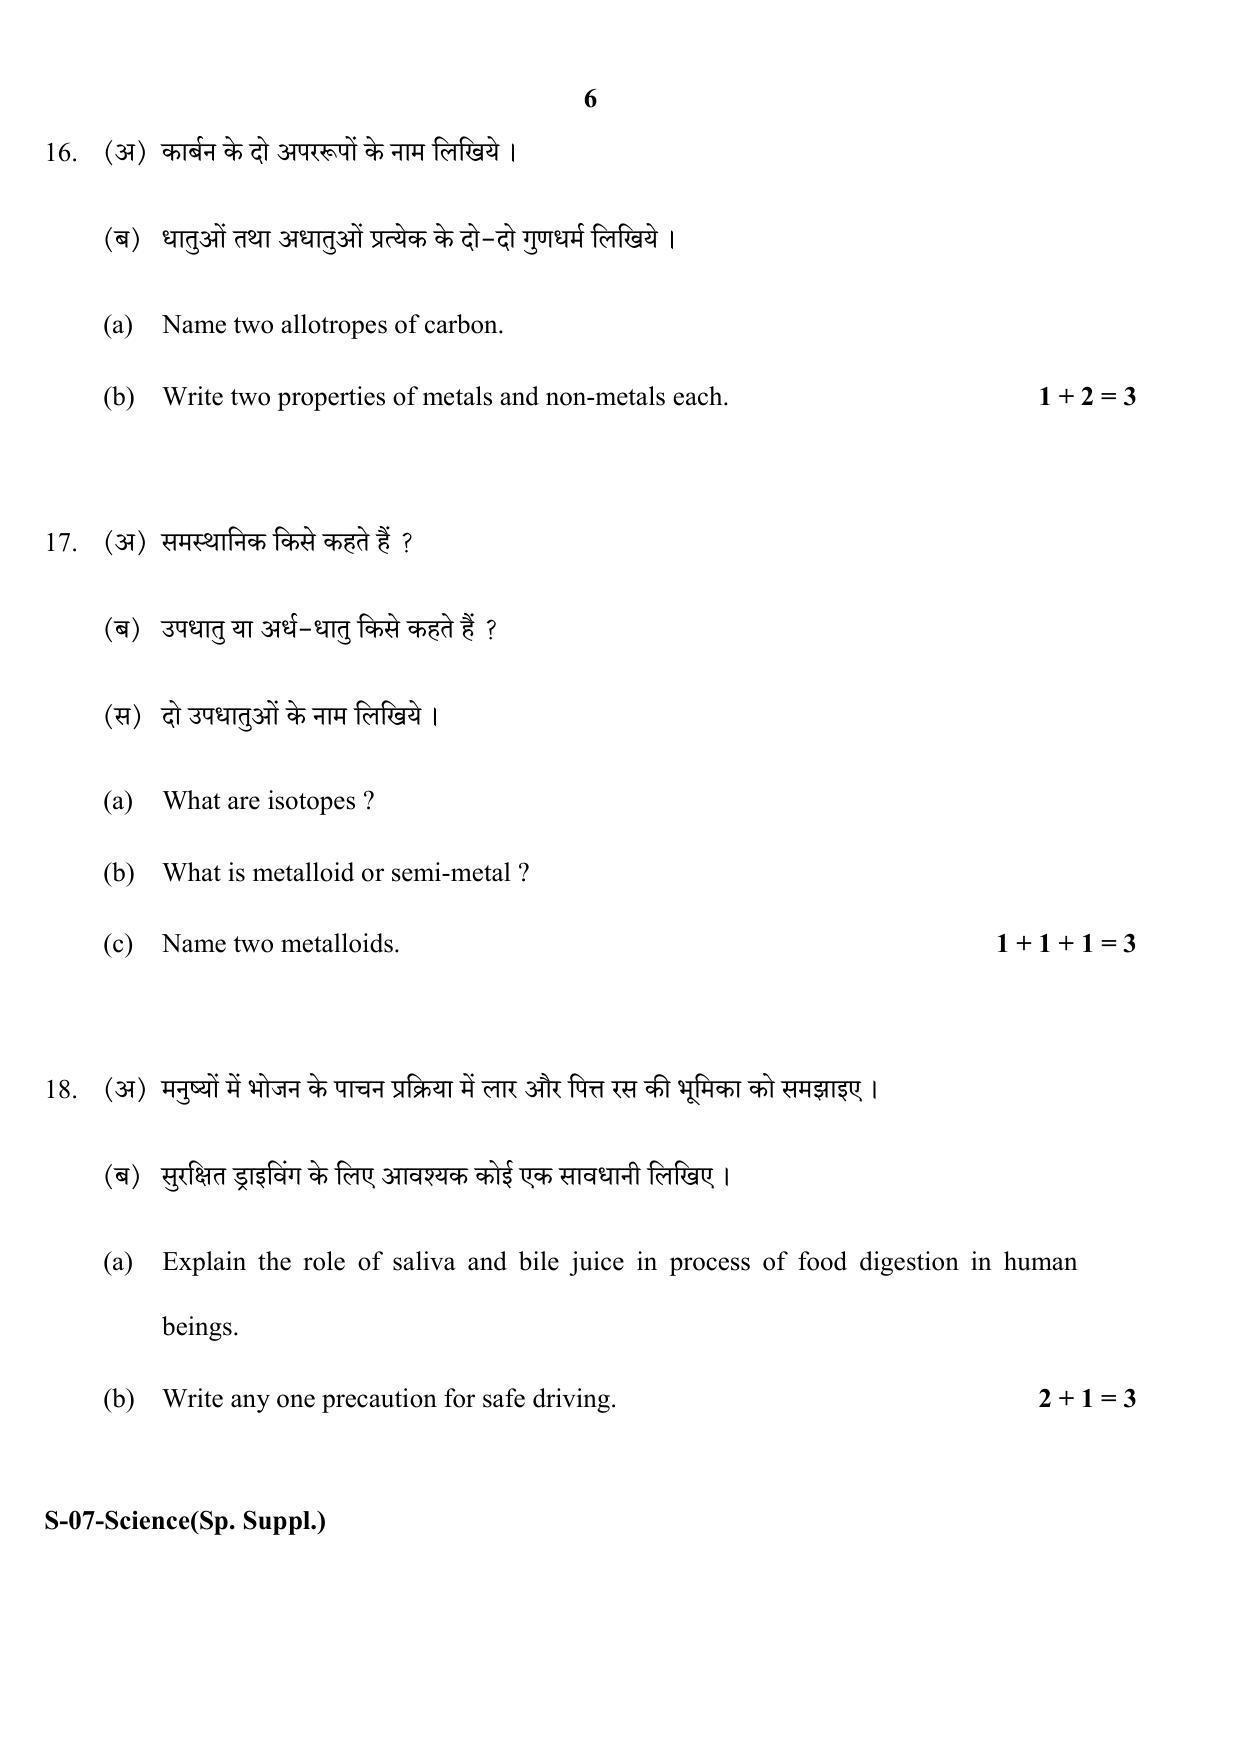 RBSE Class 10 Science ( supplementary) 2017 Question Paper - Page 6